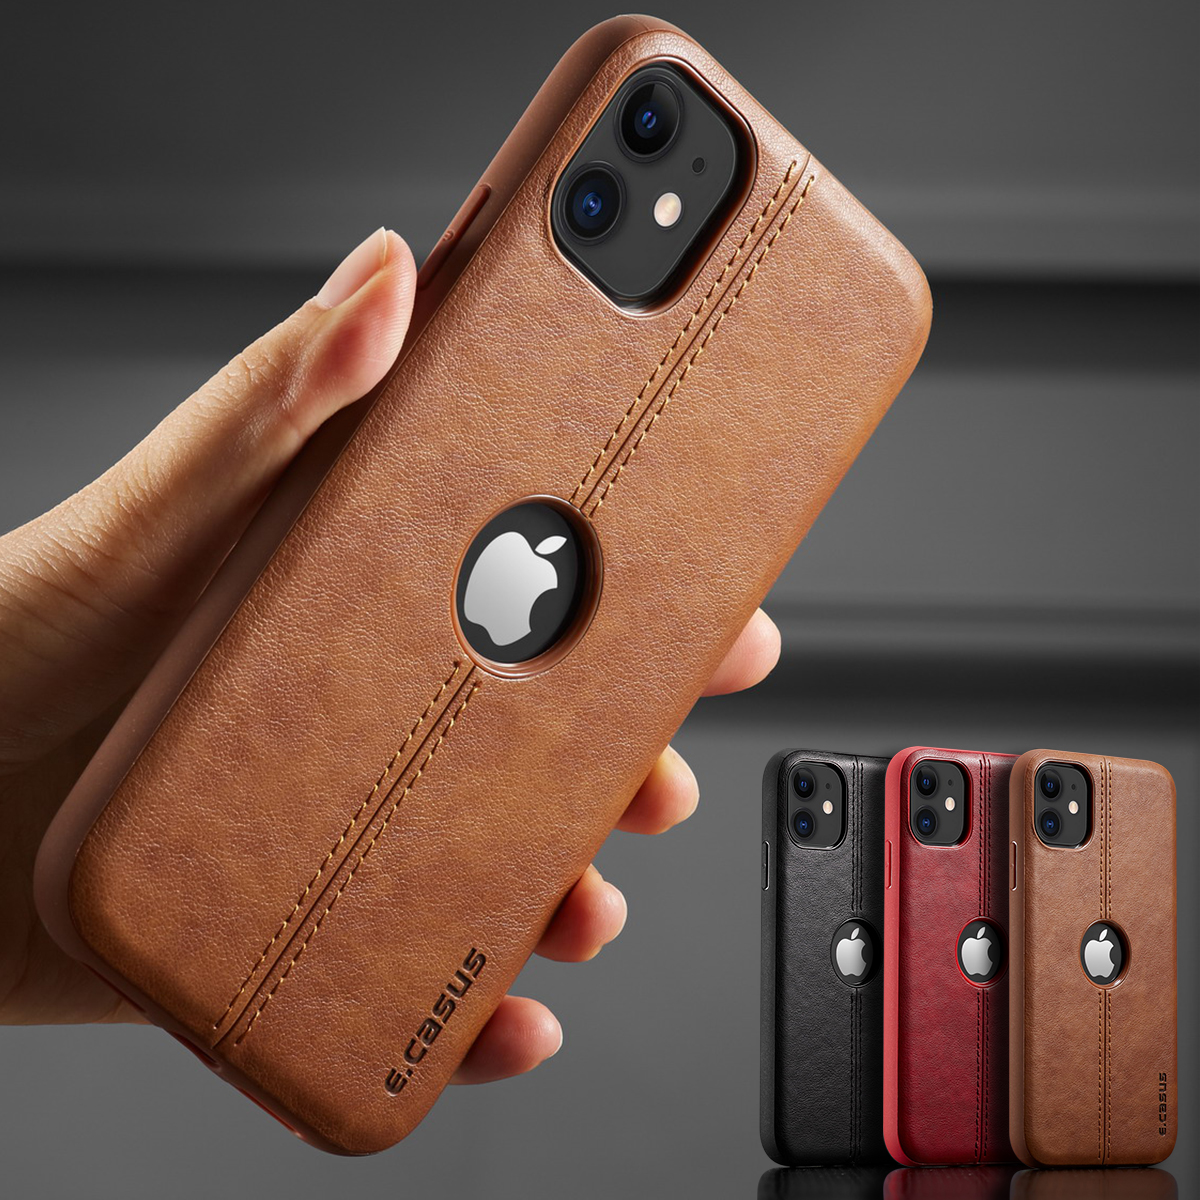 For iPhone 11 11 Pro 11 Pro Max Case New SLIM Luxury Leather Back Case Cover For iPhone 11 XR XS MAX 8 7 6 Plus Shockproof Case